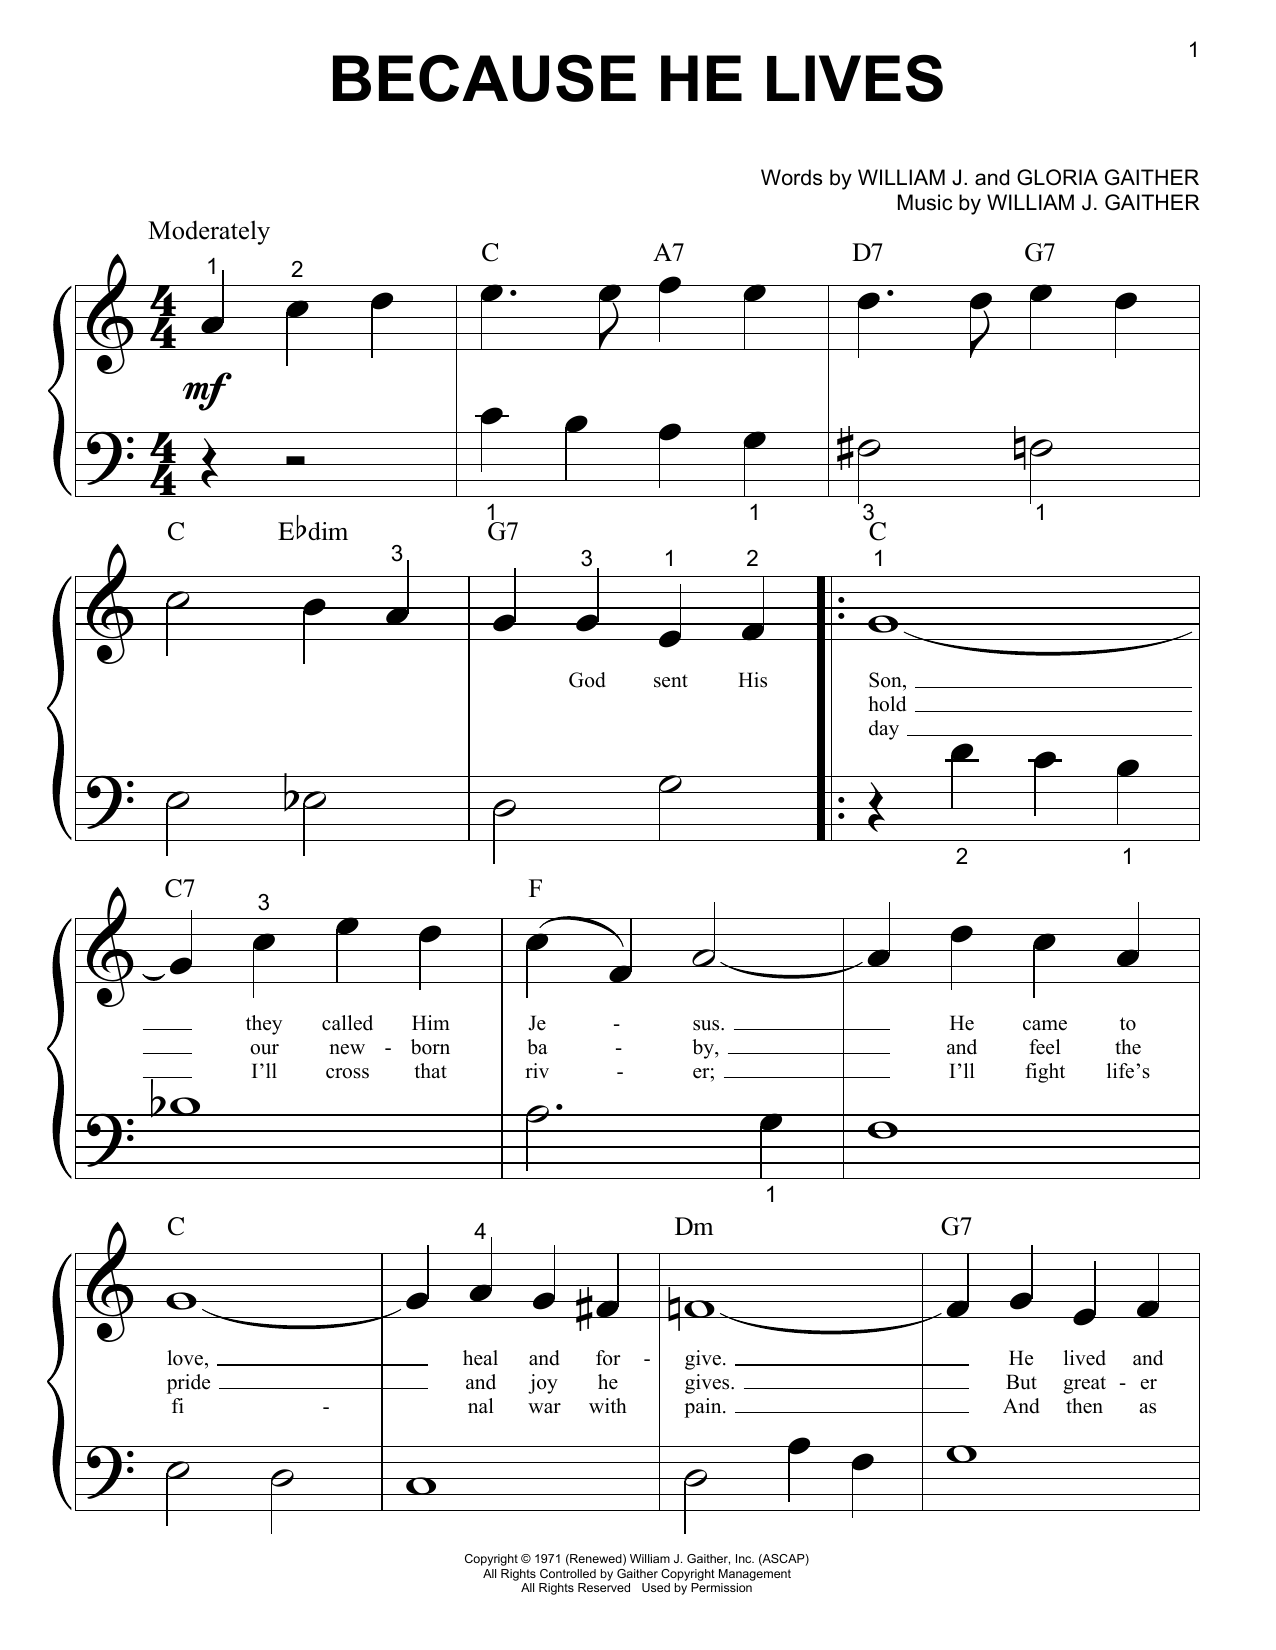 Bill &amp;amp; Gloria Gaither &amp;quot;Because He Lives&amp;quot; Sheet Music &amp;amp; Chords For with Free Printable Gospel Sheet Music for Piano